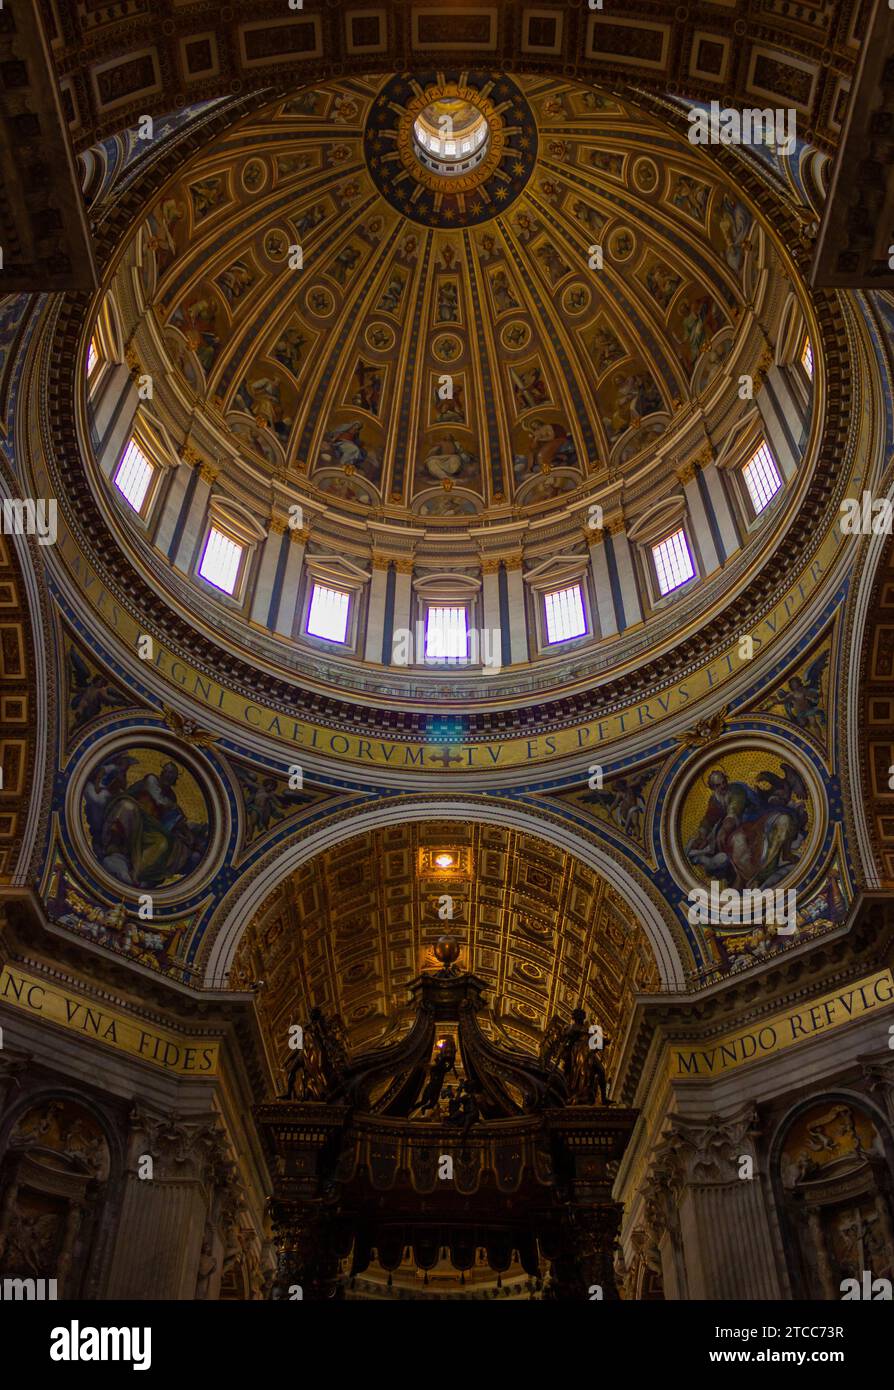 A picture of the interior of the St. Peter's Basilica and its iconic dome Stock Photo